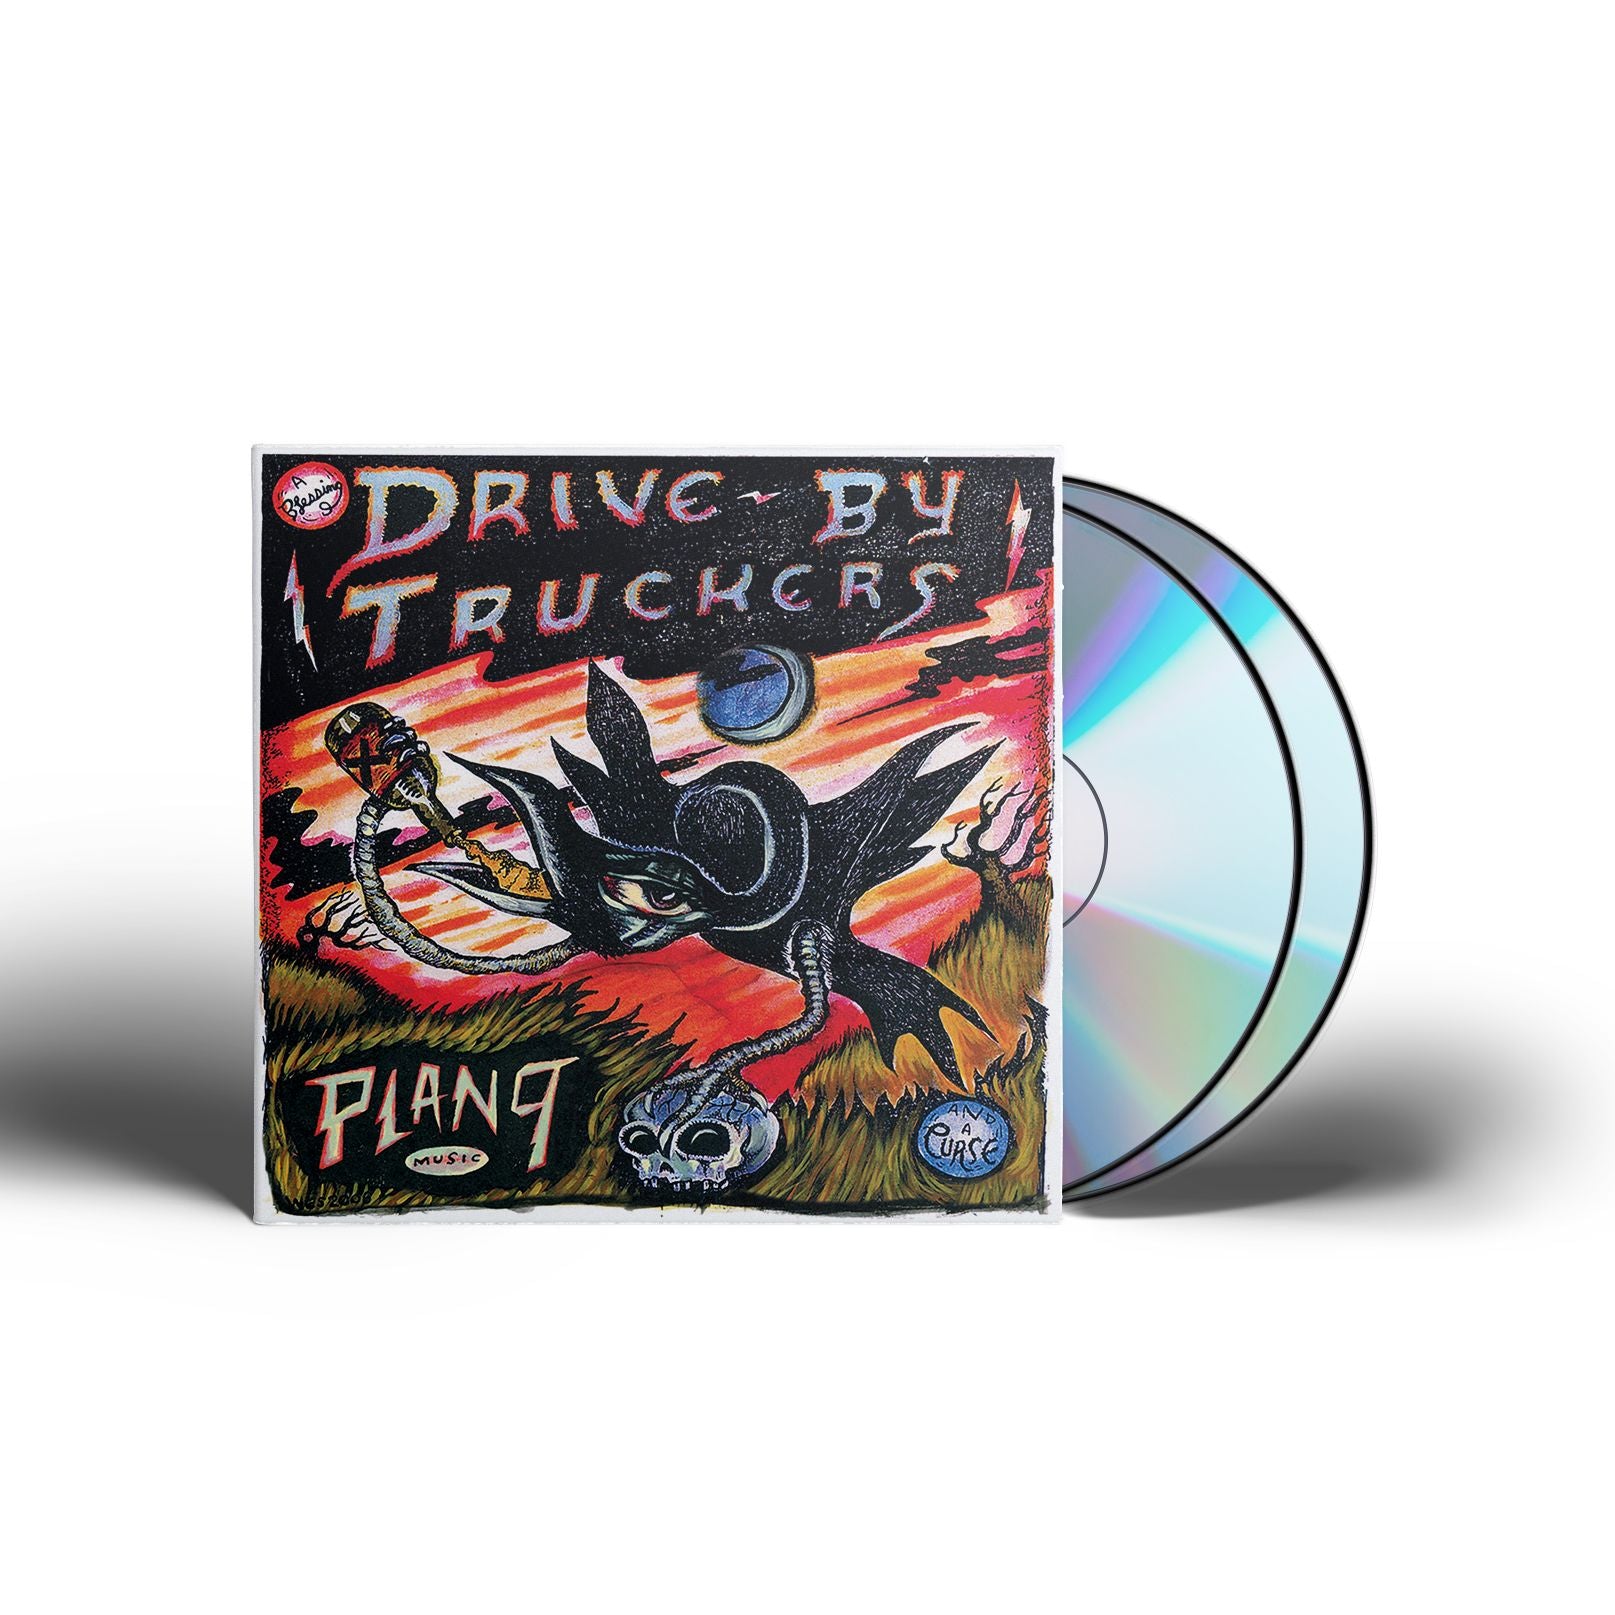 Drive-By Truckers - Live @ Plan 9 [CD]